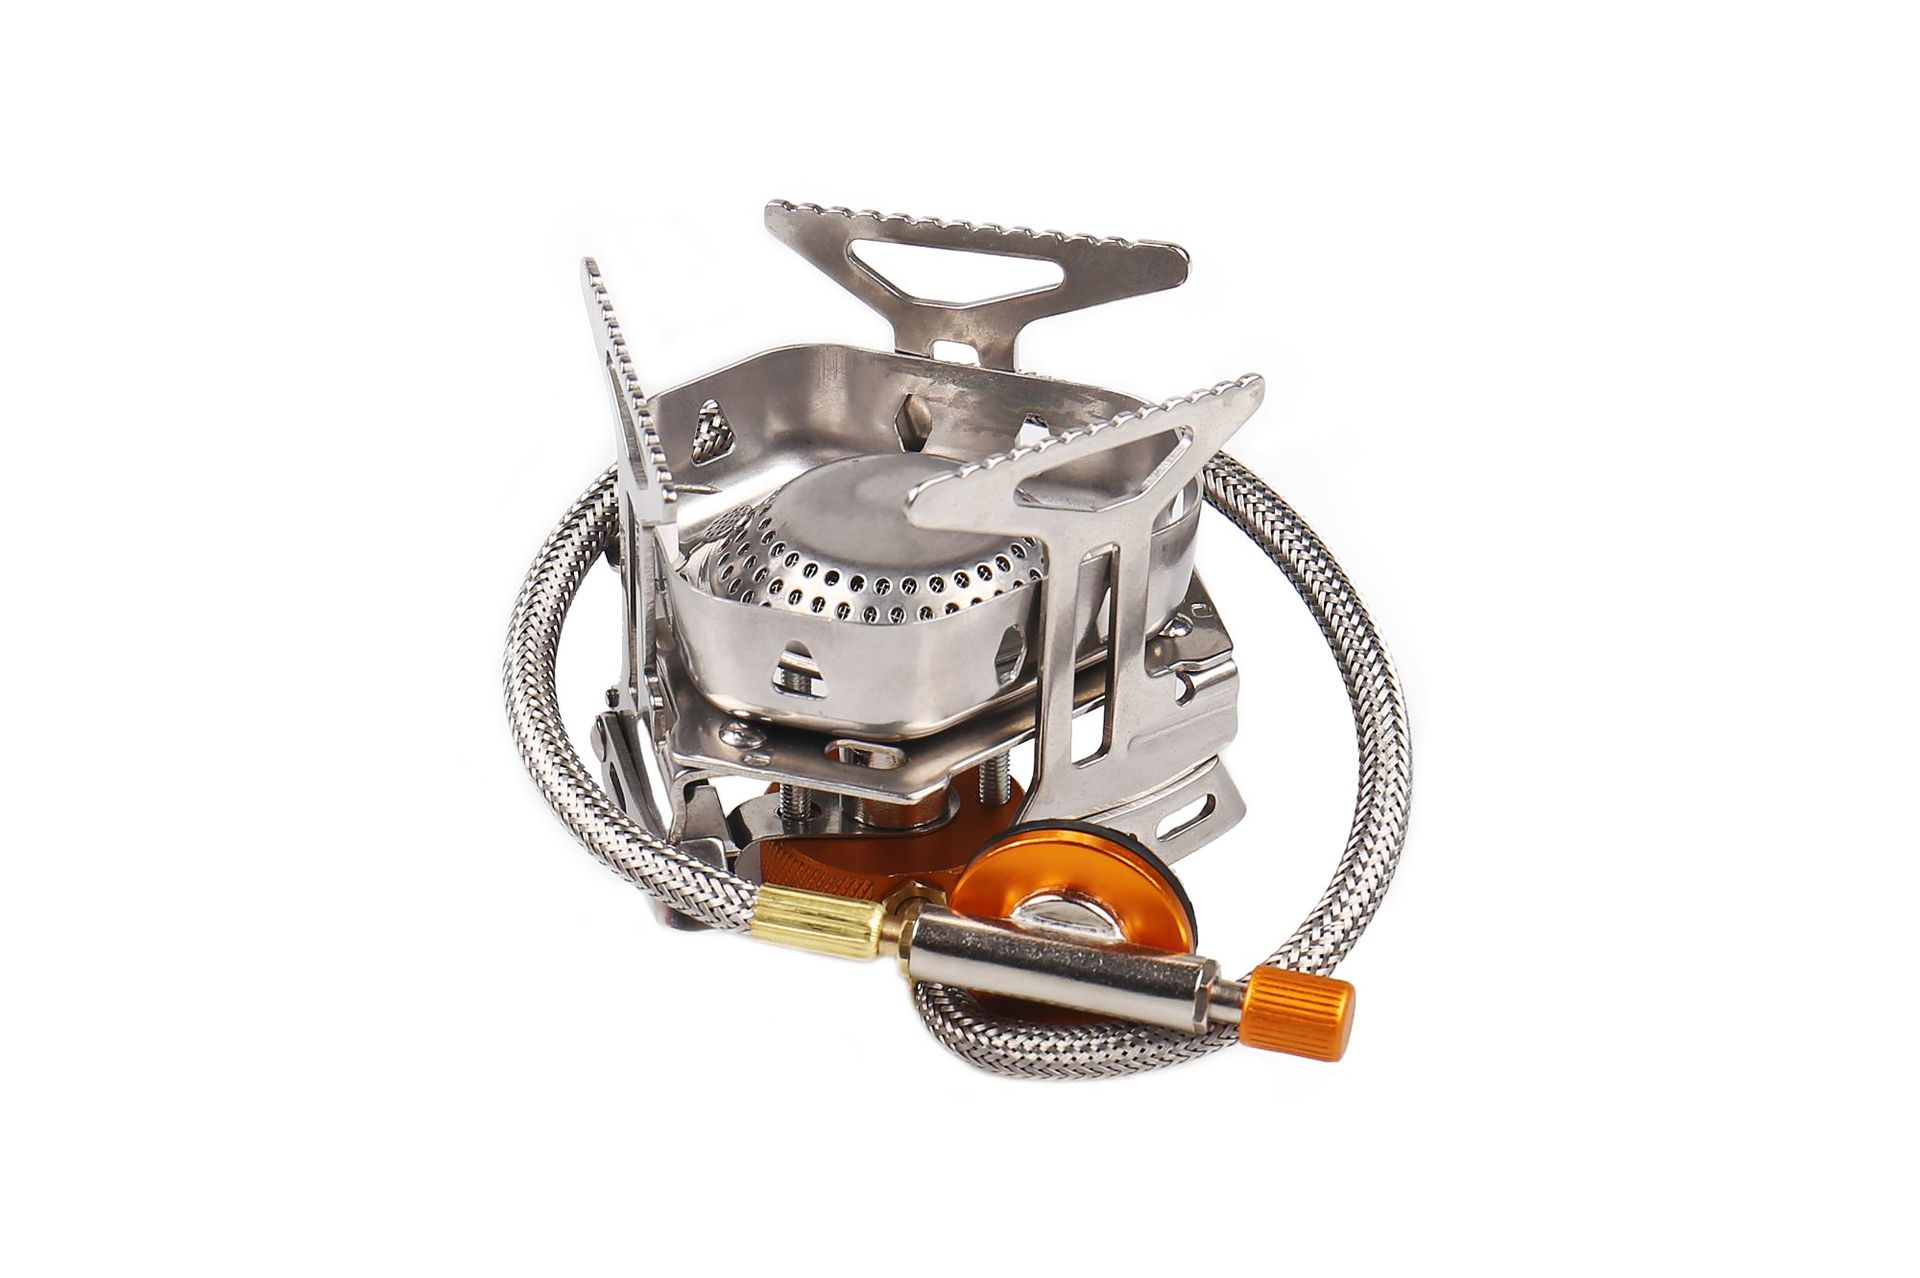 New Picnic Stove Outdoor Portable Camping Furnace End Mountaineering Camping Liquefied Gas Stove Factory Wholesale